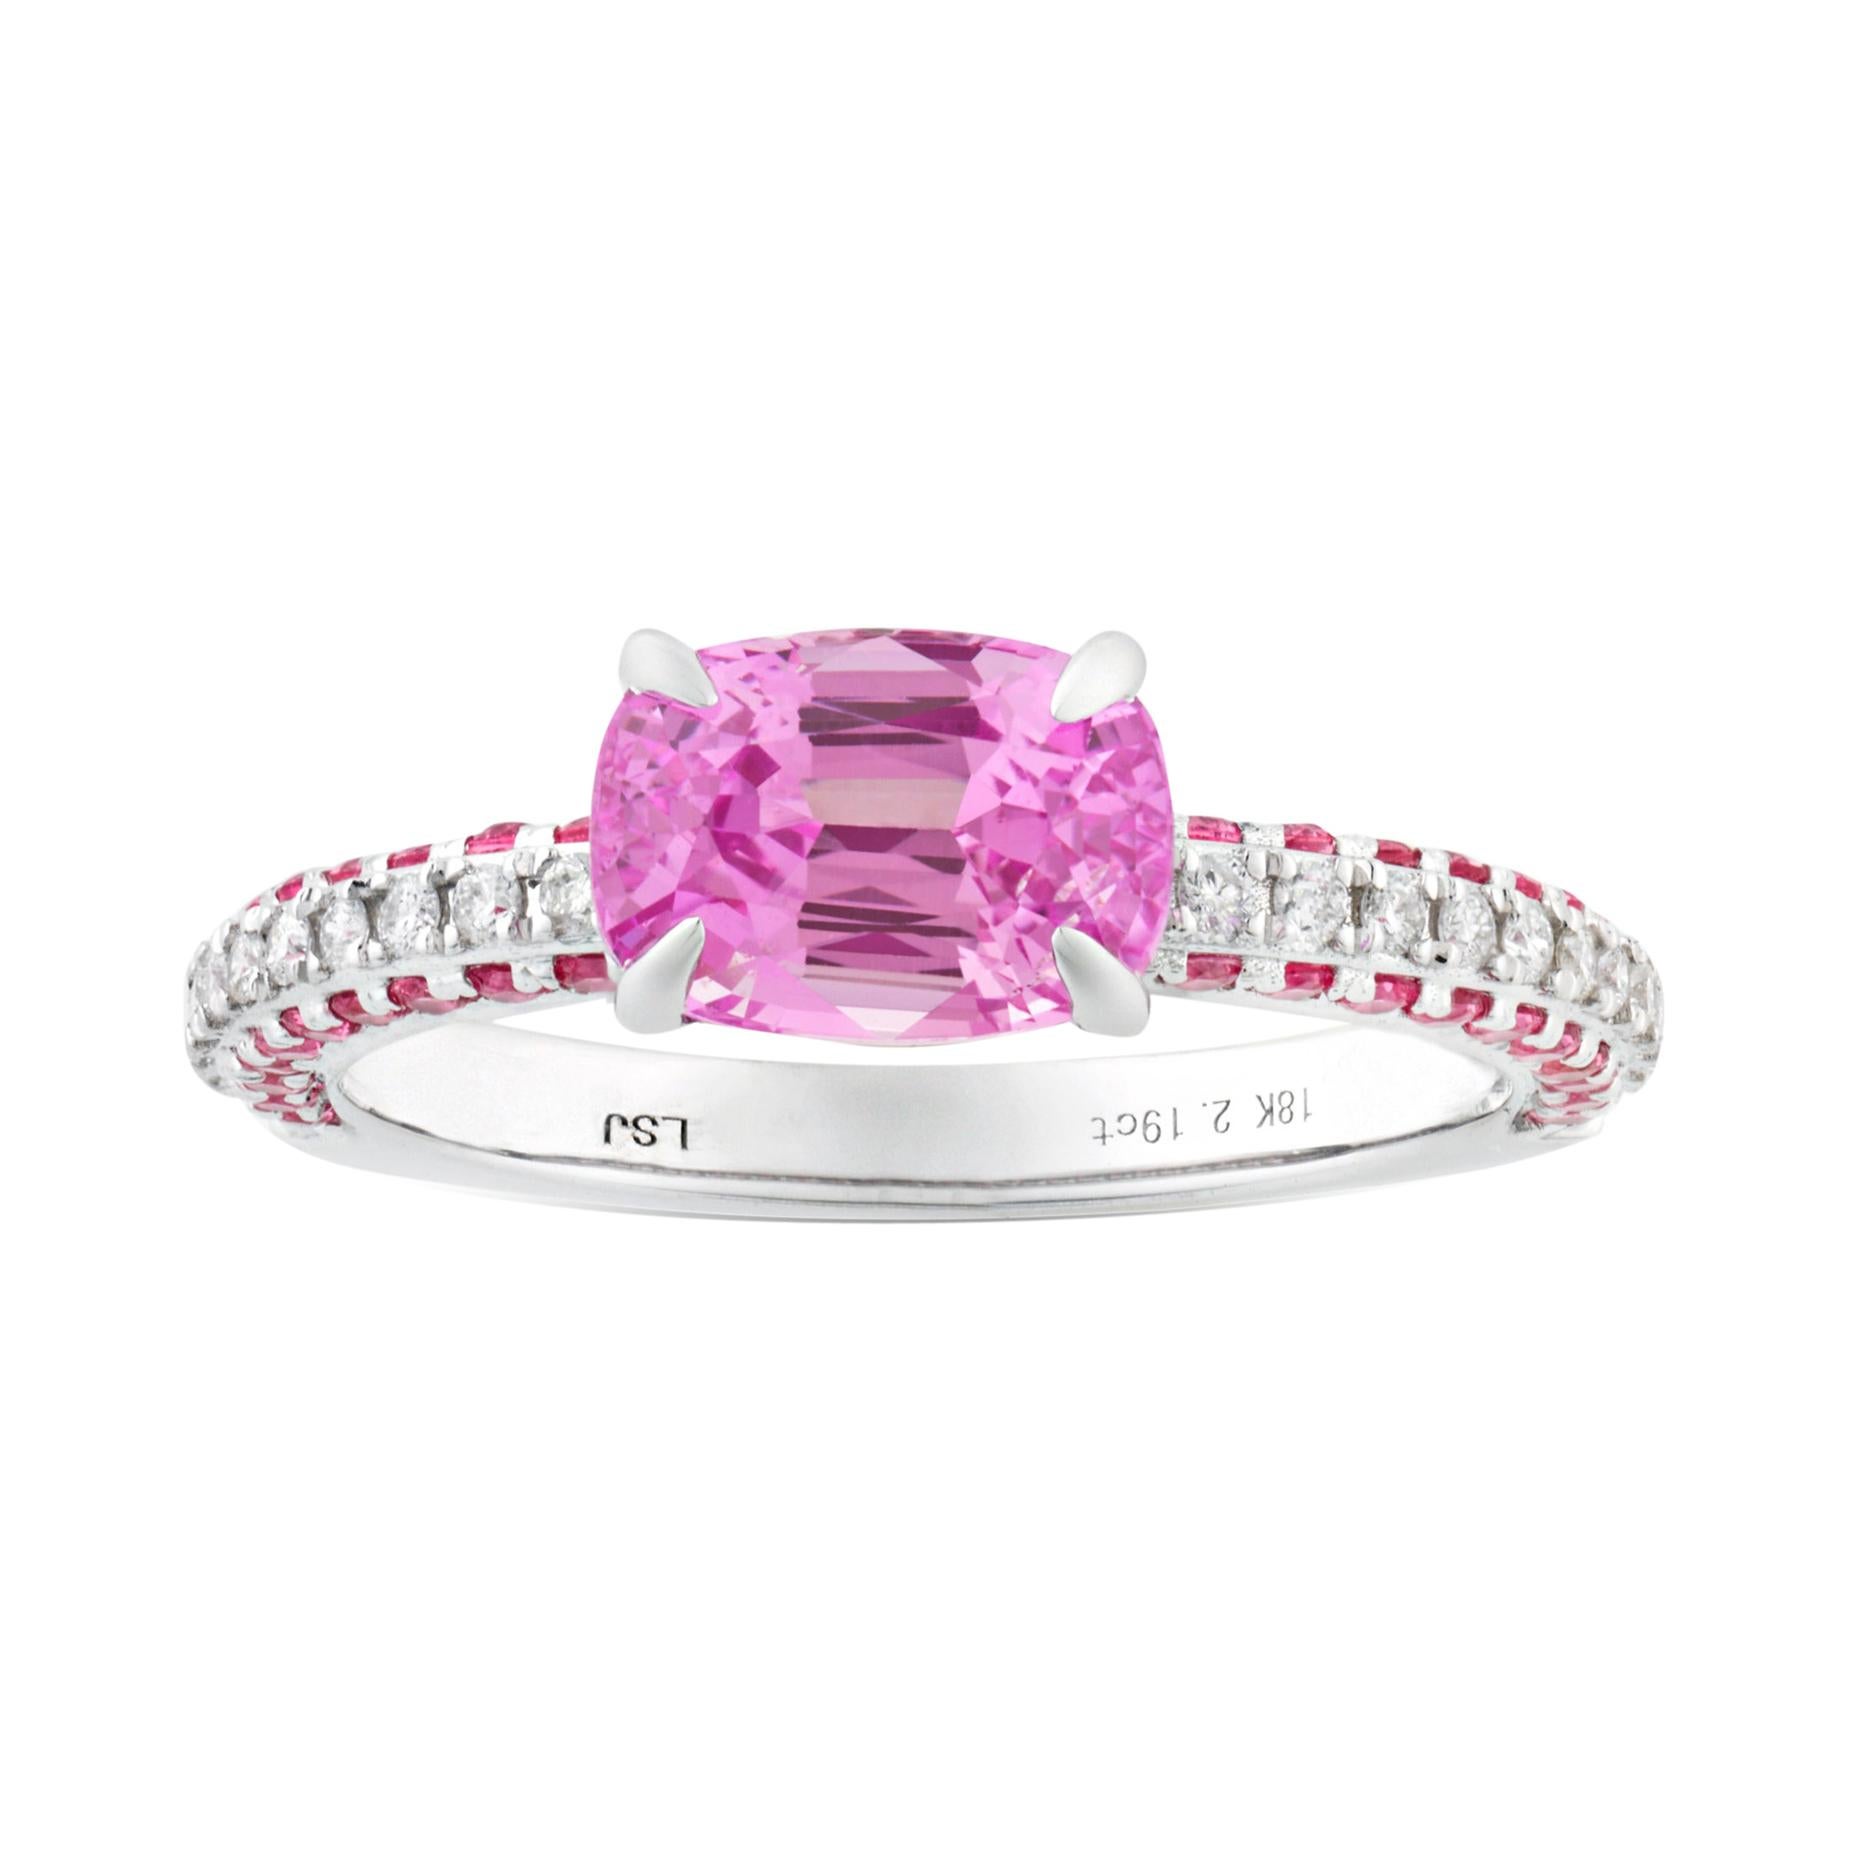 Untreated Pink Sapphire Ring, 2.19 Carats